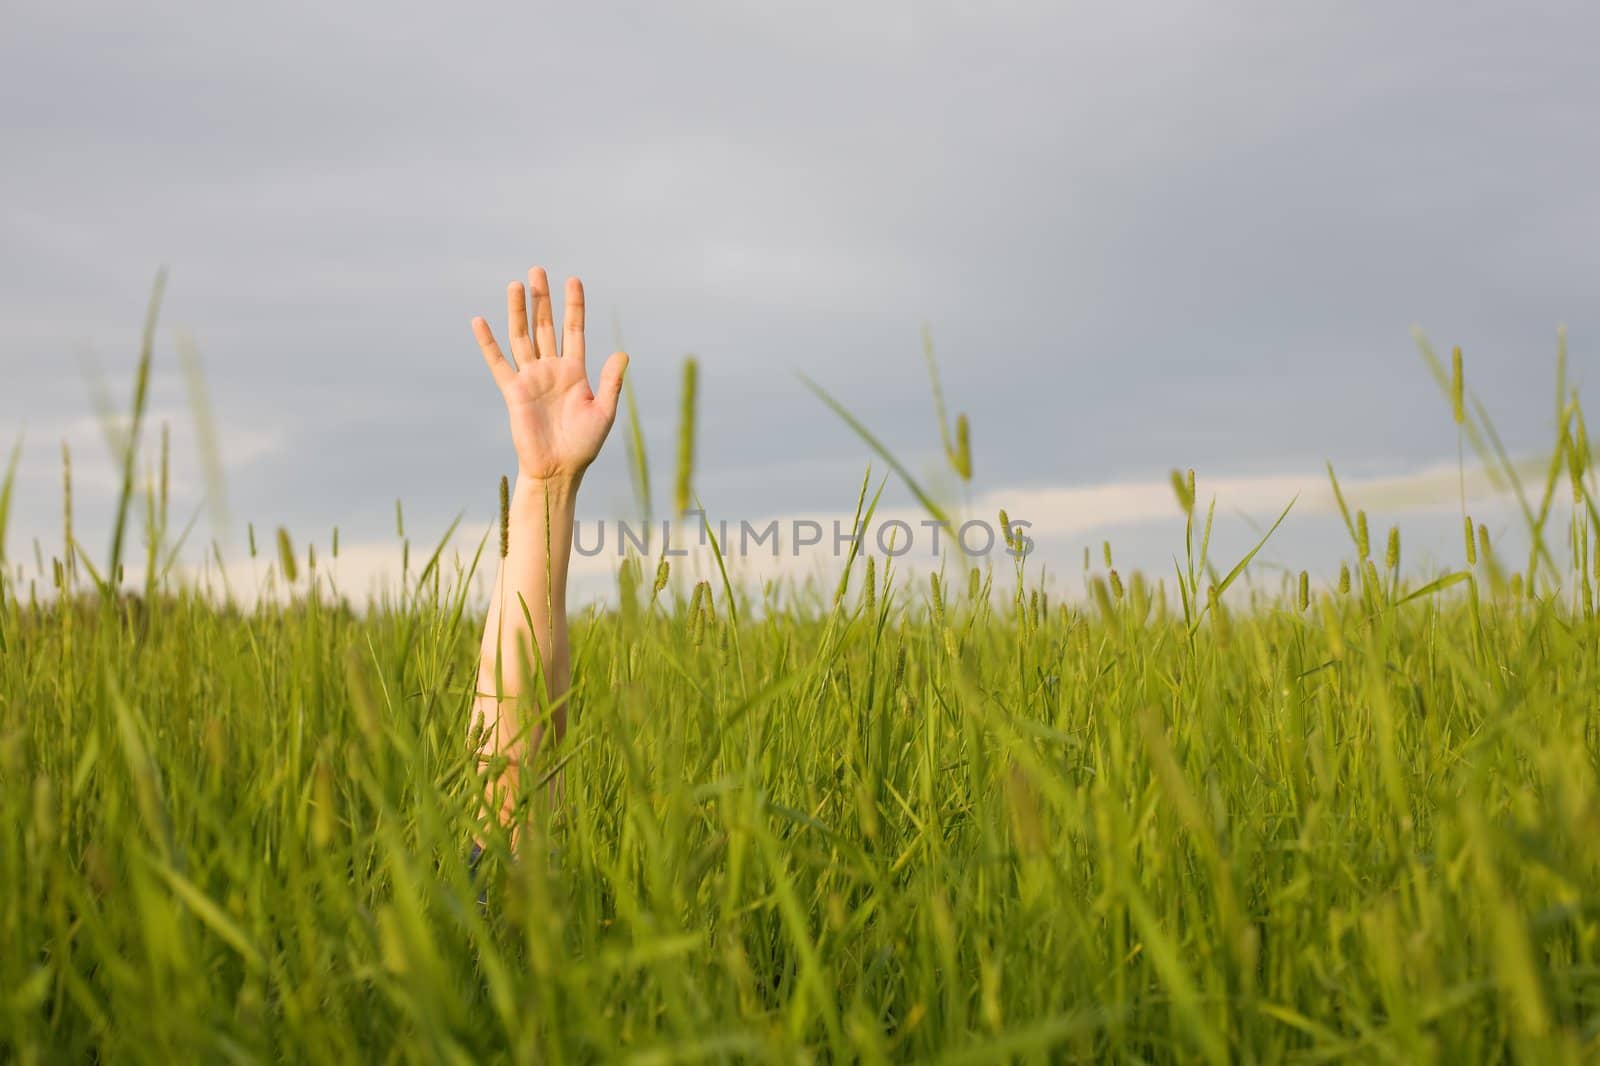 The hand stretched from a grass upwards